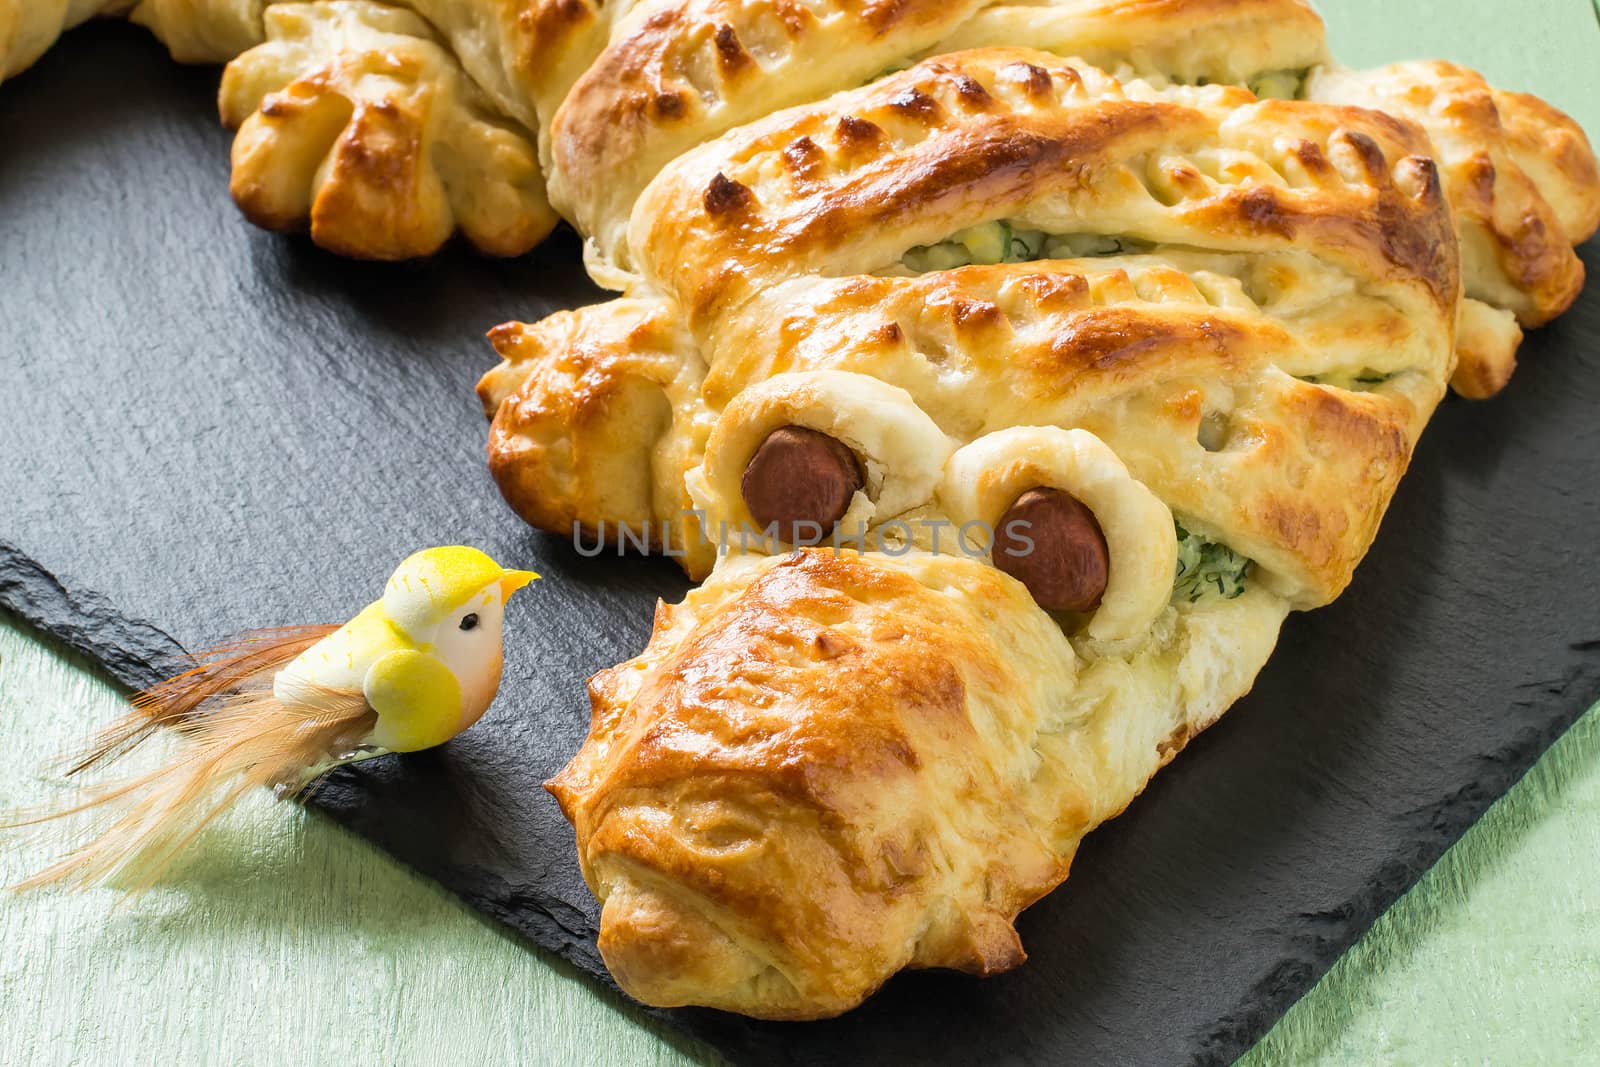 Original cake in form of crocodile with potatoes, cheese and herbs. Cake is served to Halloween party as fun and spooky monster